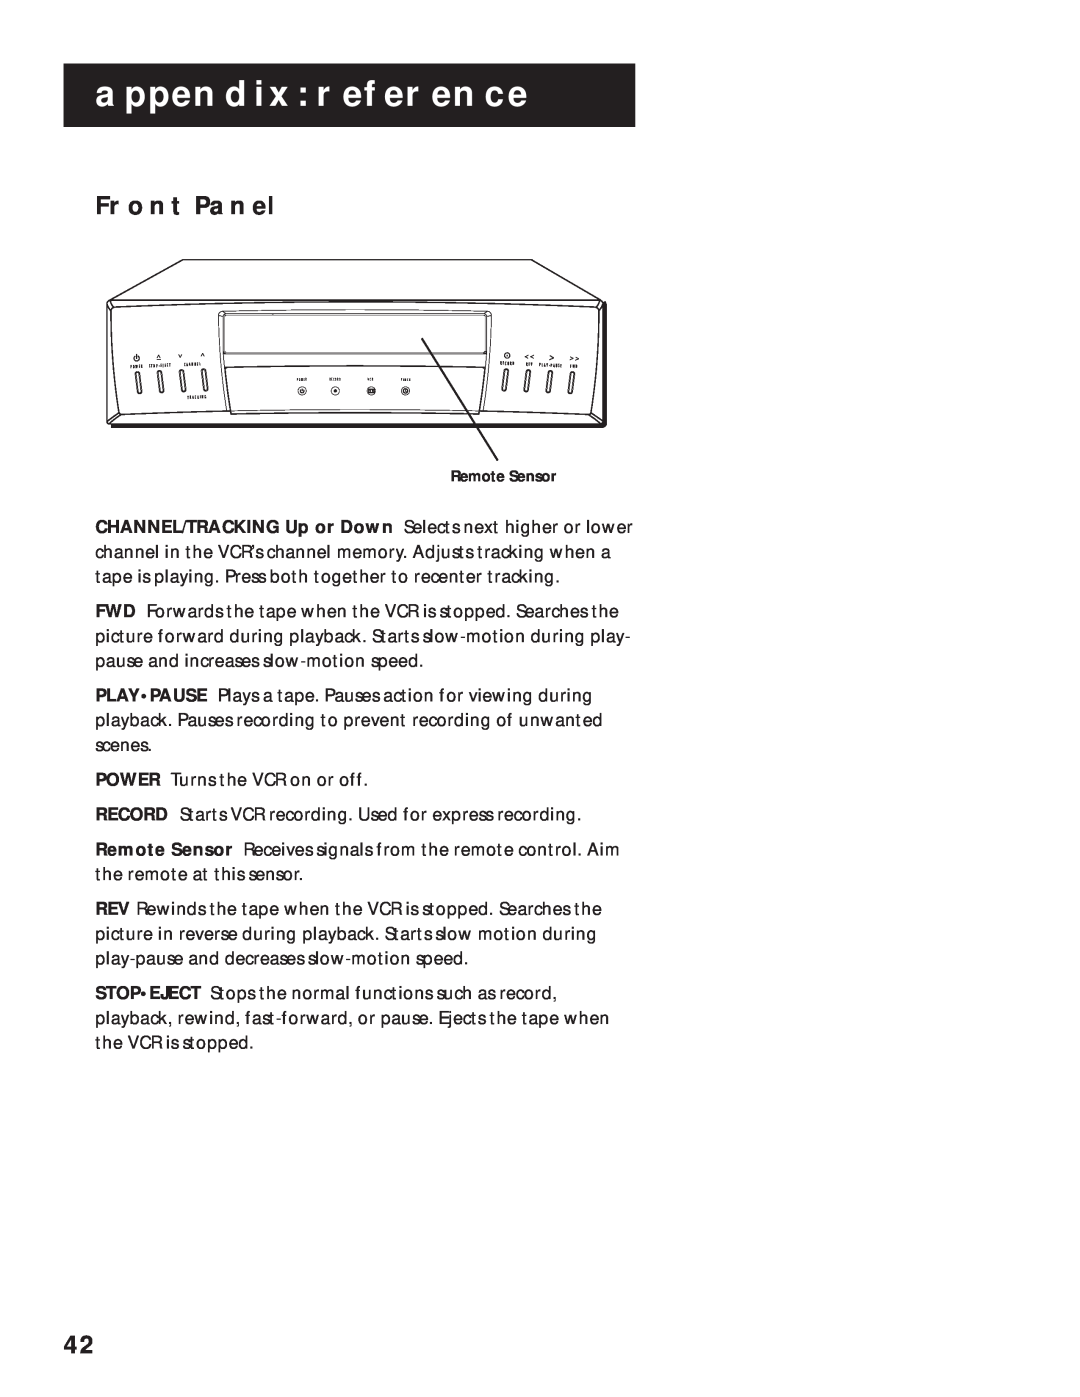 RCA VR525 manual Front Panel, Appendix Reference 